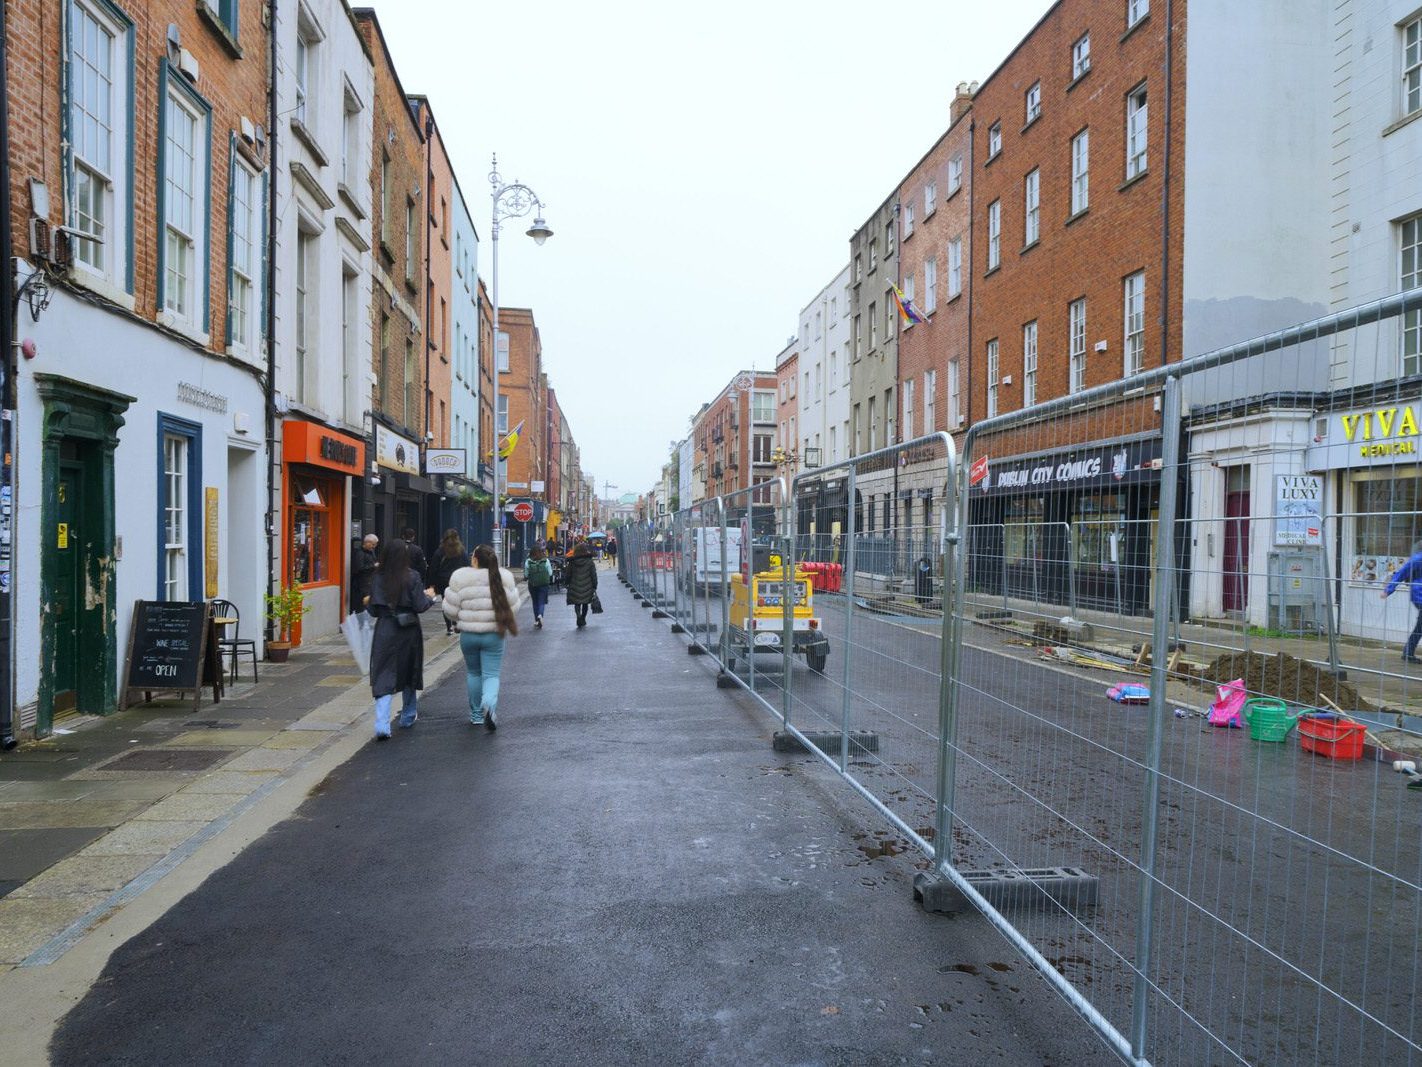 CAPEL STREET ON A DULL WET DAY [INTERIM CAPEL STREET IMPROVEMENT WORKS ARE NOW ONGOING] 006